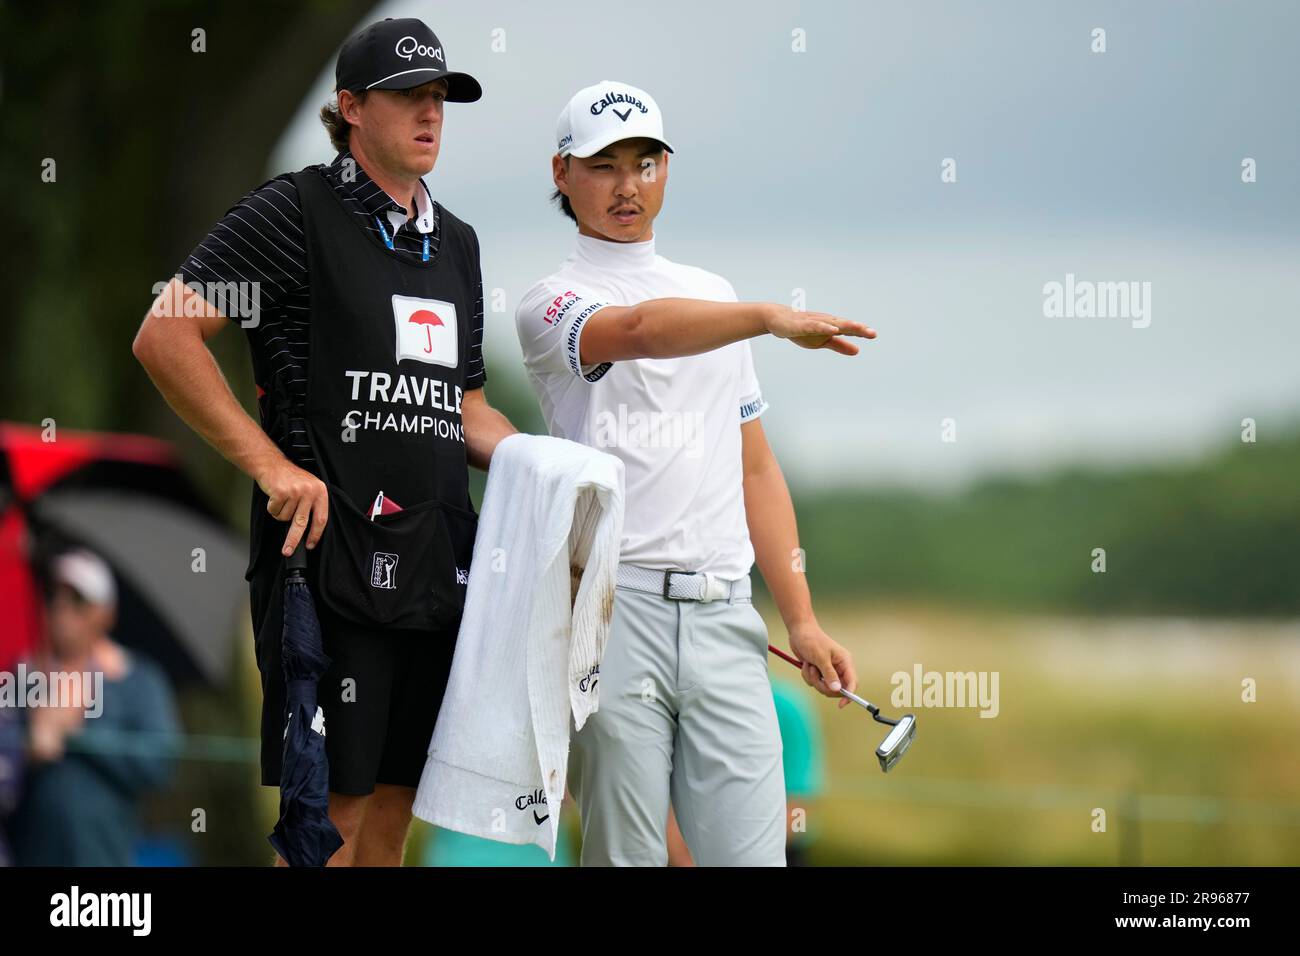 Australias Min Woo Lee, right, talks with his caddie on the fourth hole during the third round of the Travelers Championship golf tournament at TPC River Highlands, Saturday, June 24, 2023, in